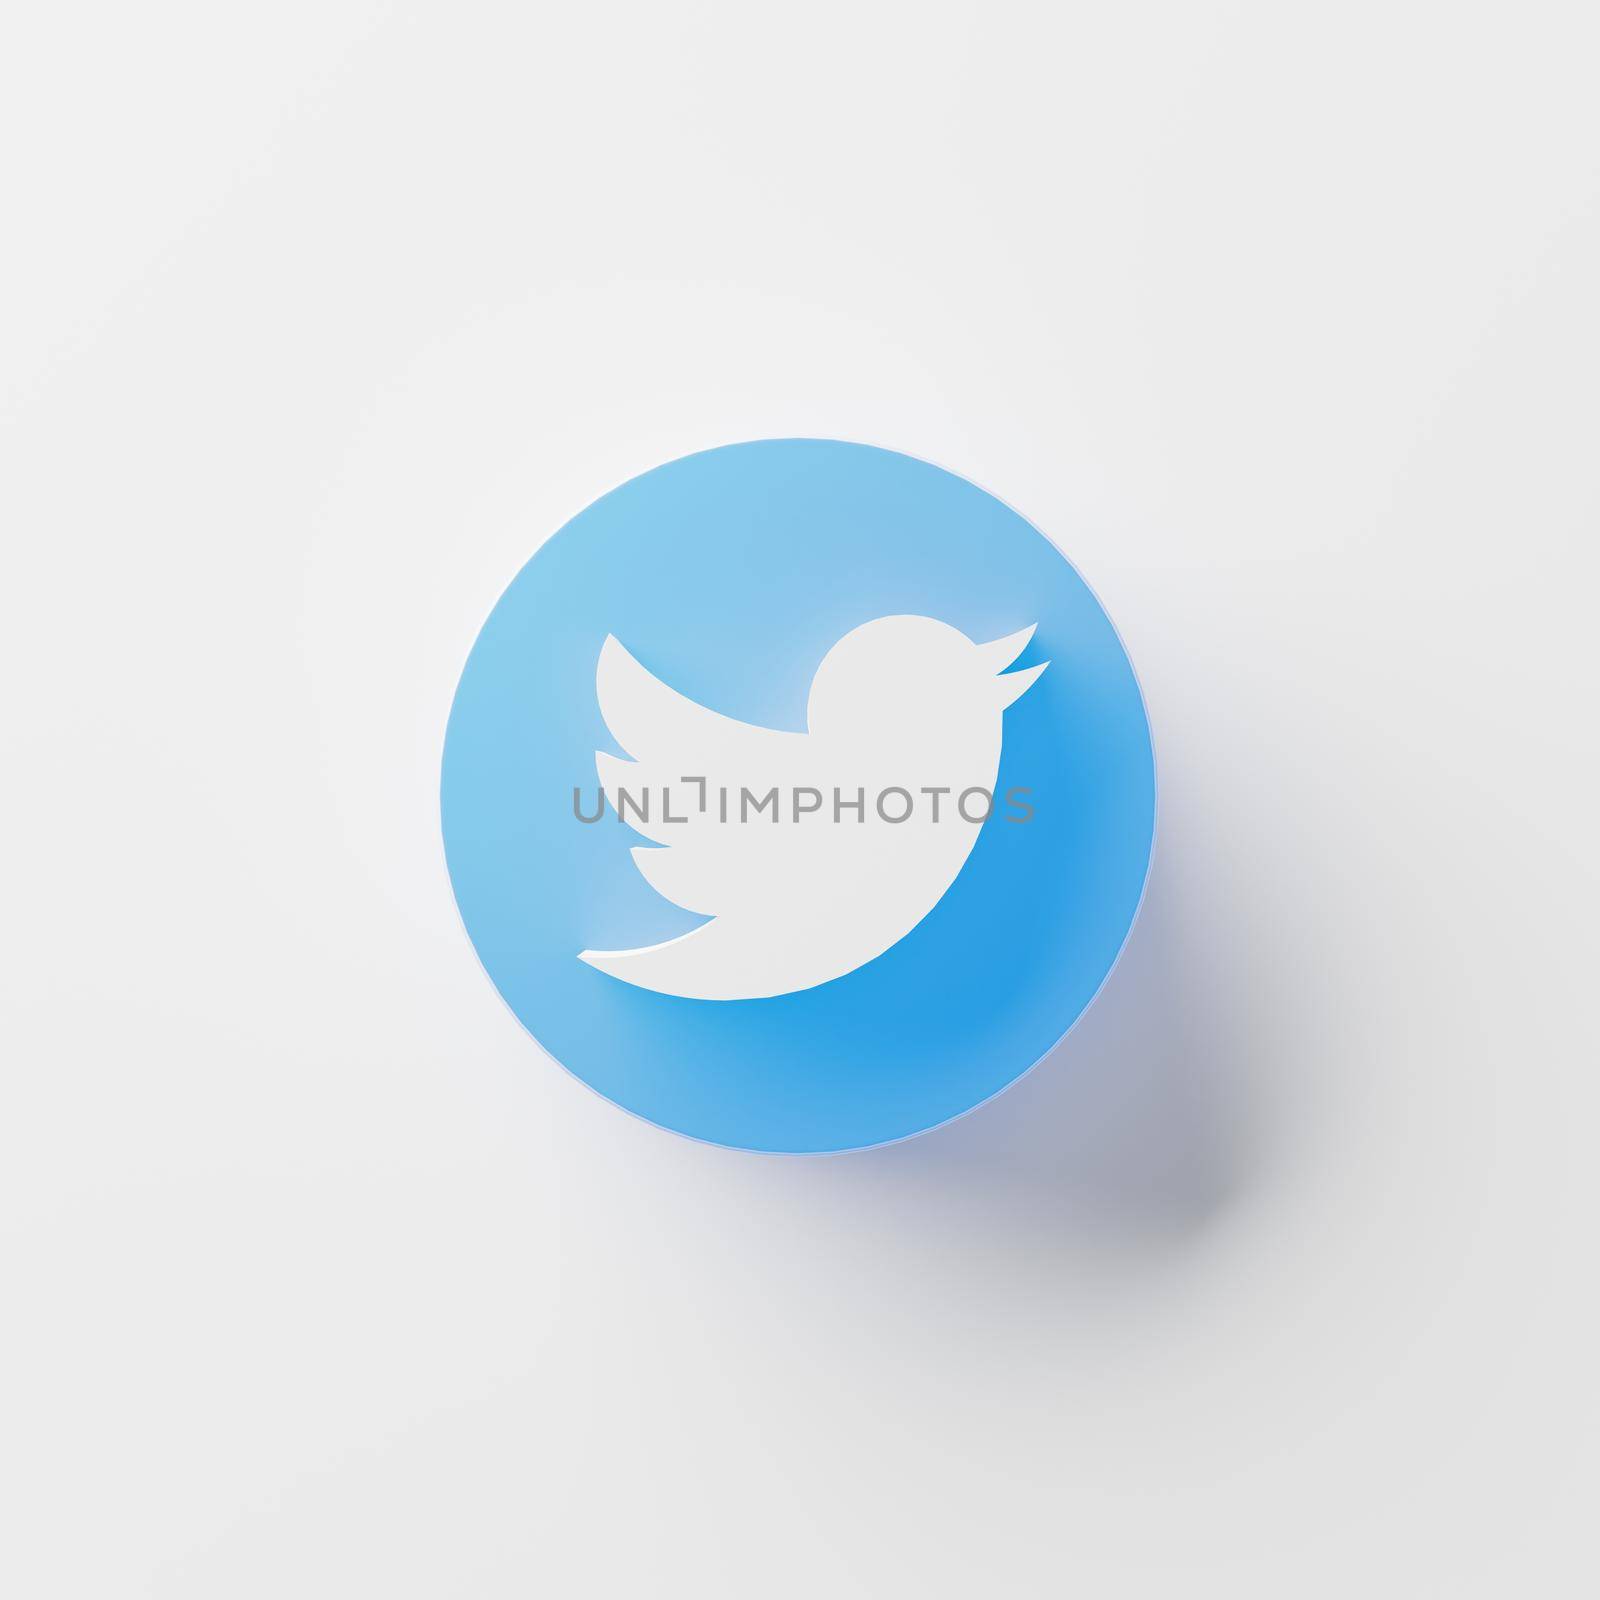 Chonburi, Thailand - Apr 15, 2021: A close up Twitter logo icon on isolated white background. Twitter is largest social media mobile app in the world, shallow depth of field. 3D illustration rendering by MiniStocker